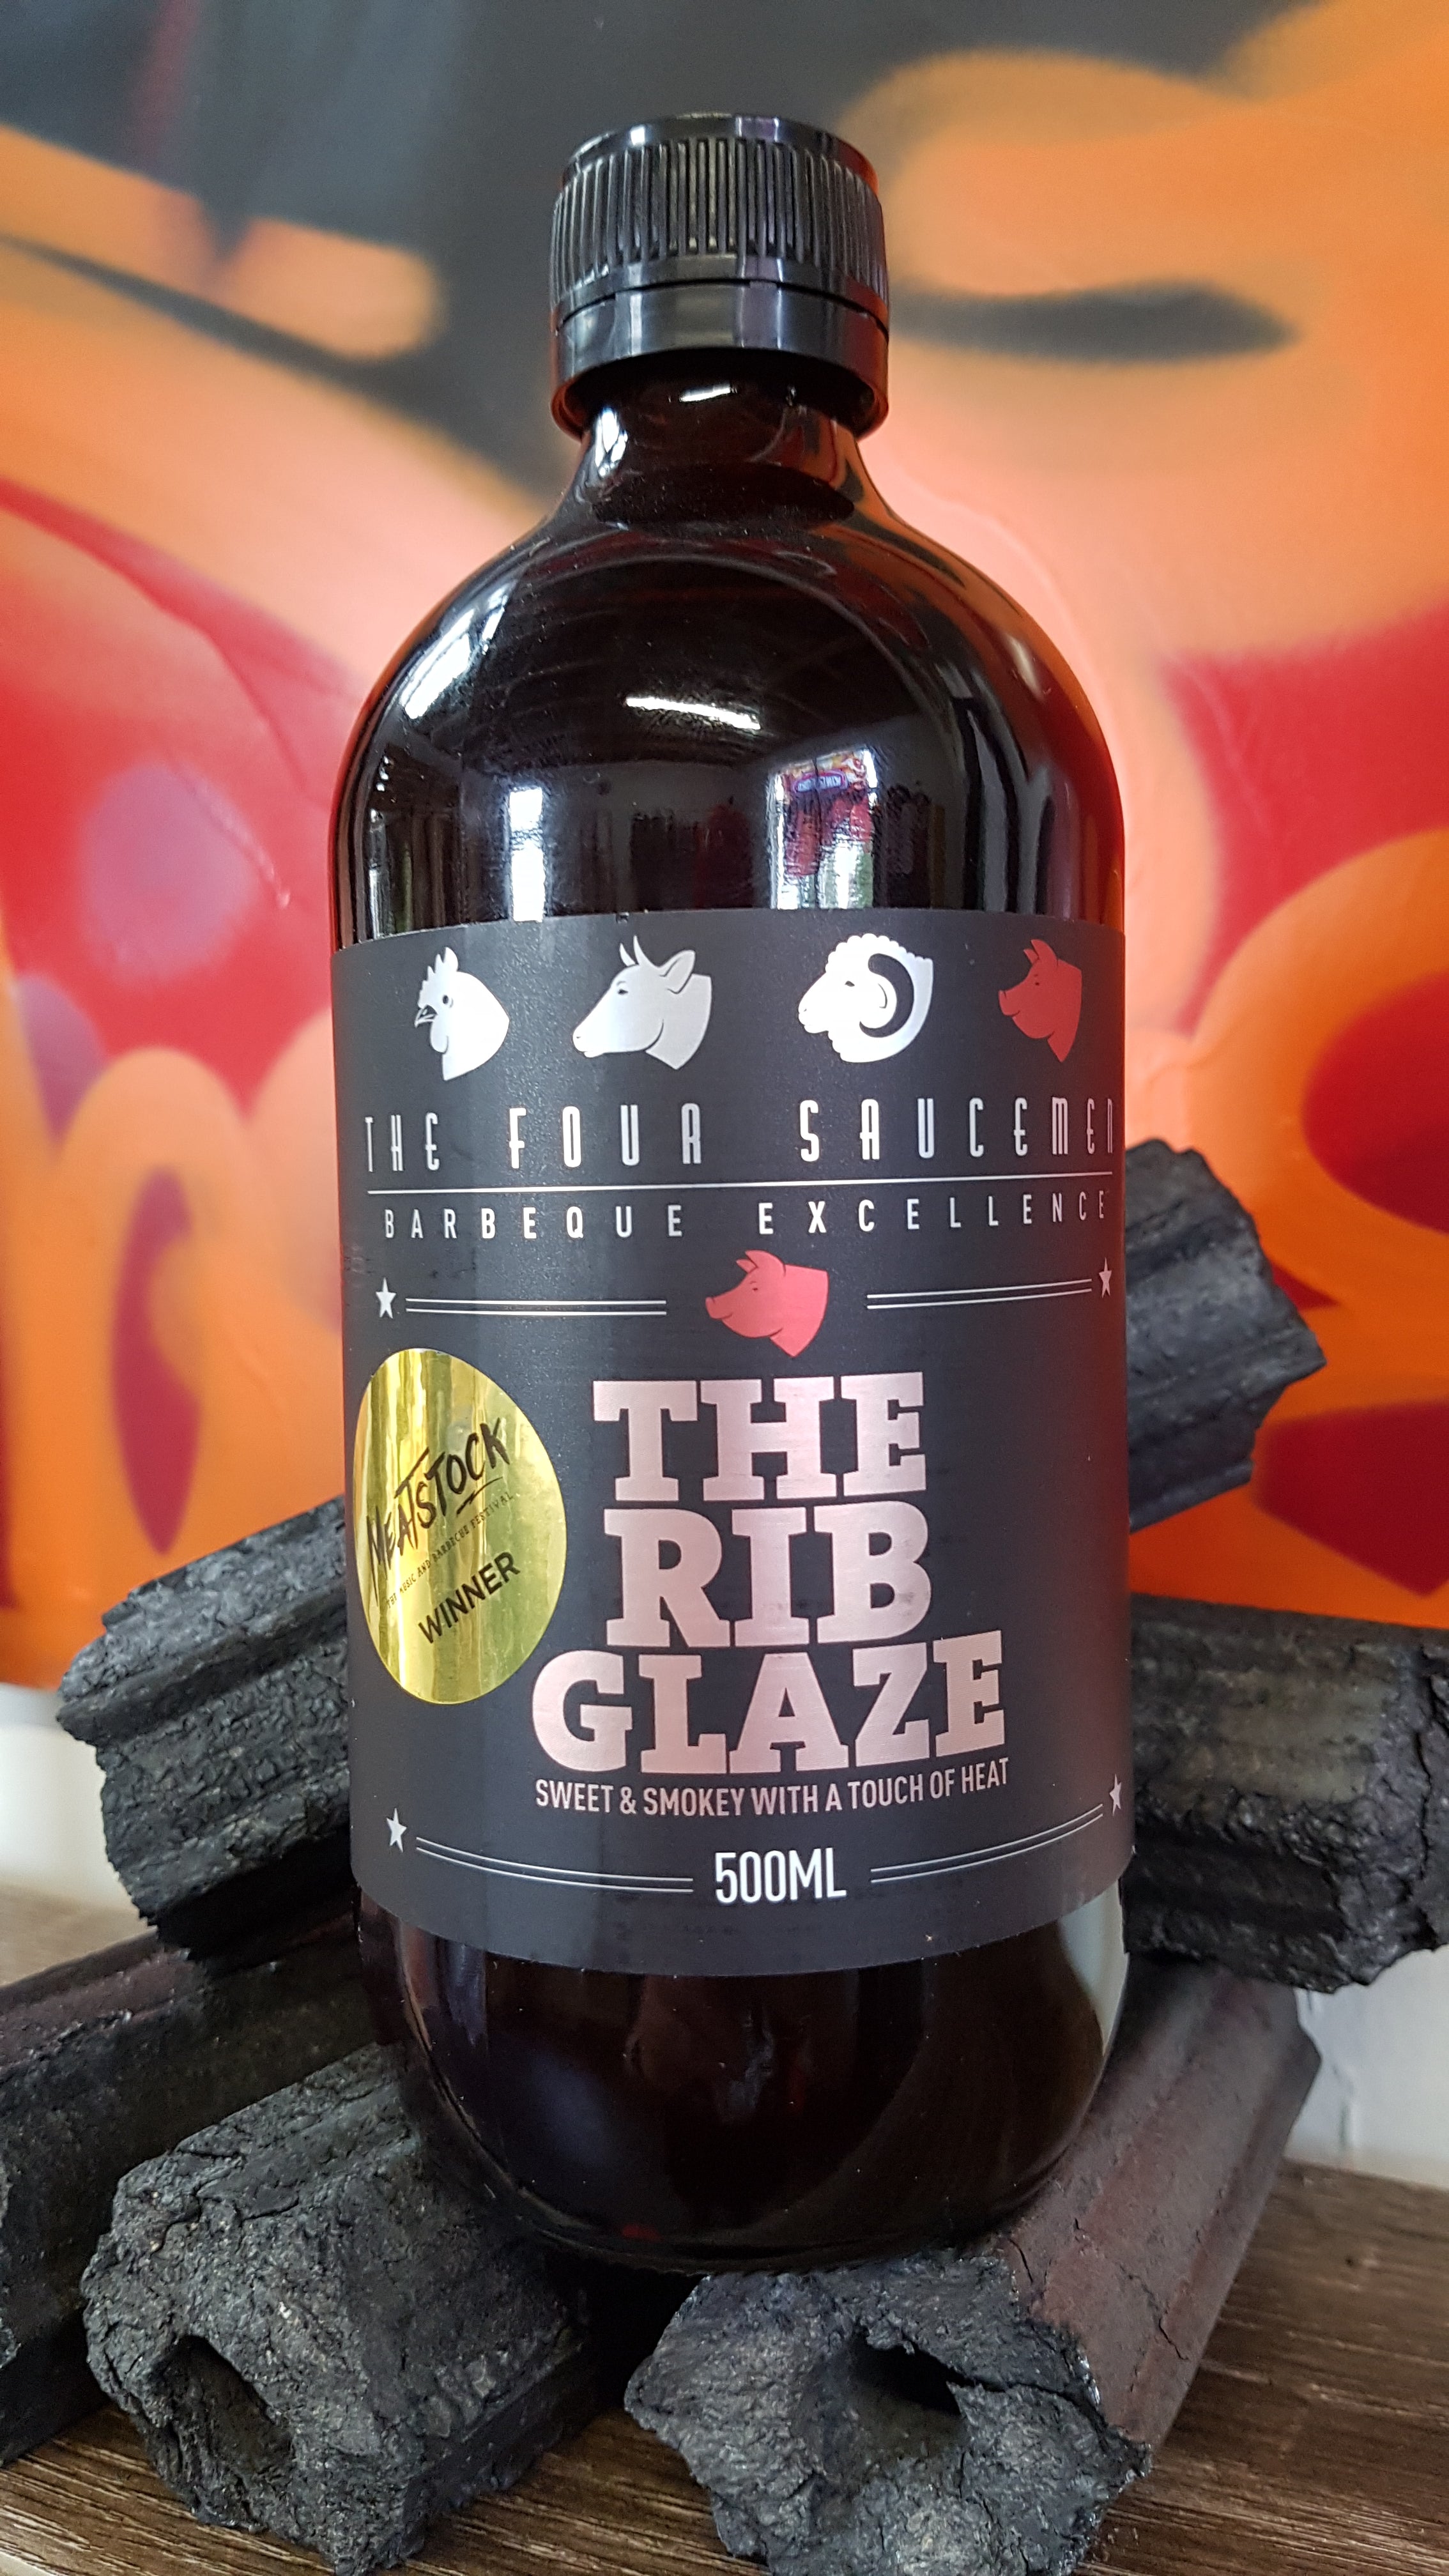 The Rib Glaze 500ml by The Four Saucemen